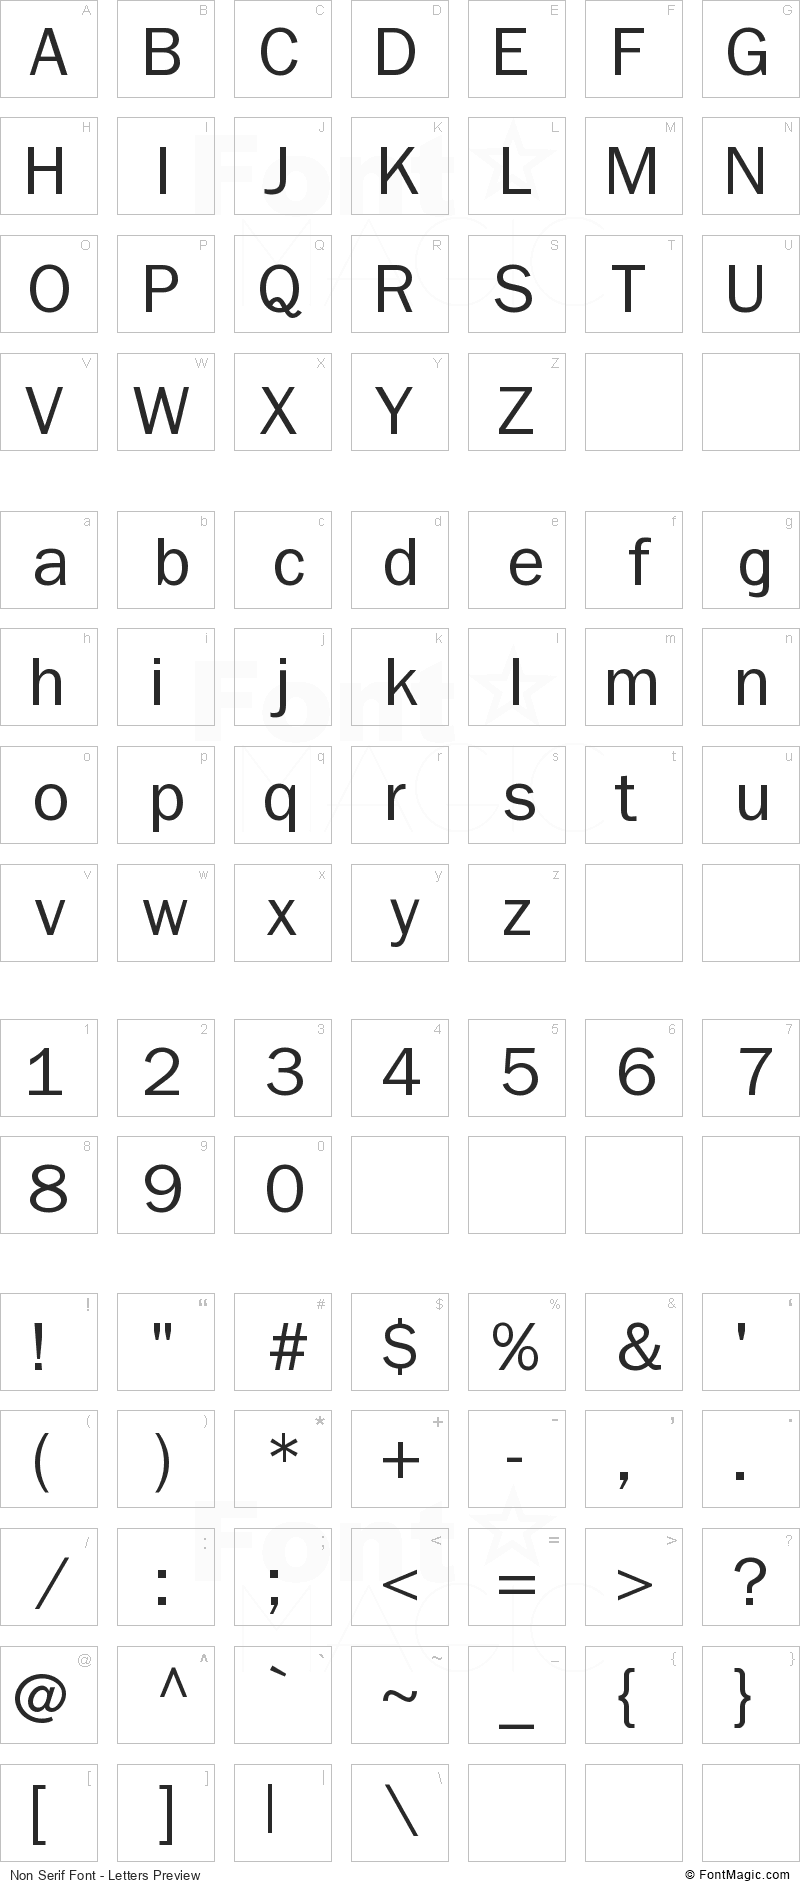 Non Serif Font - All Latters Preview Chart